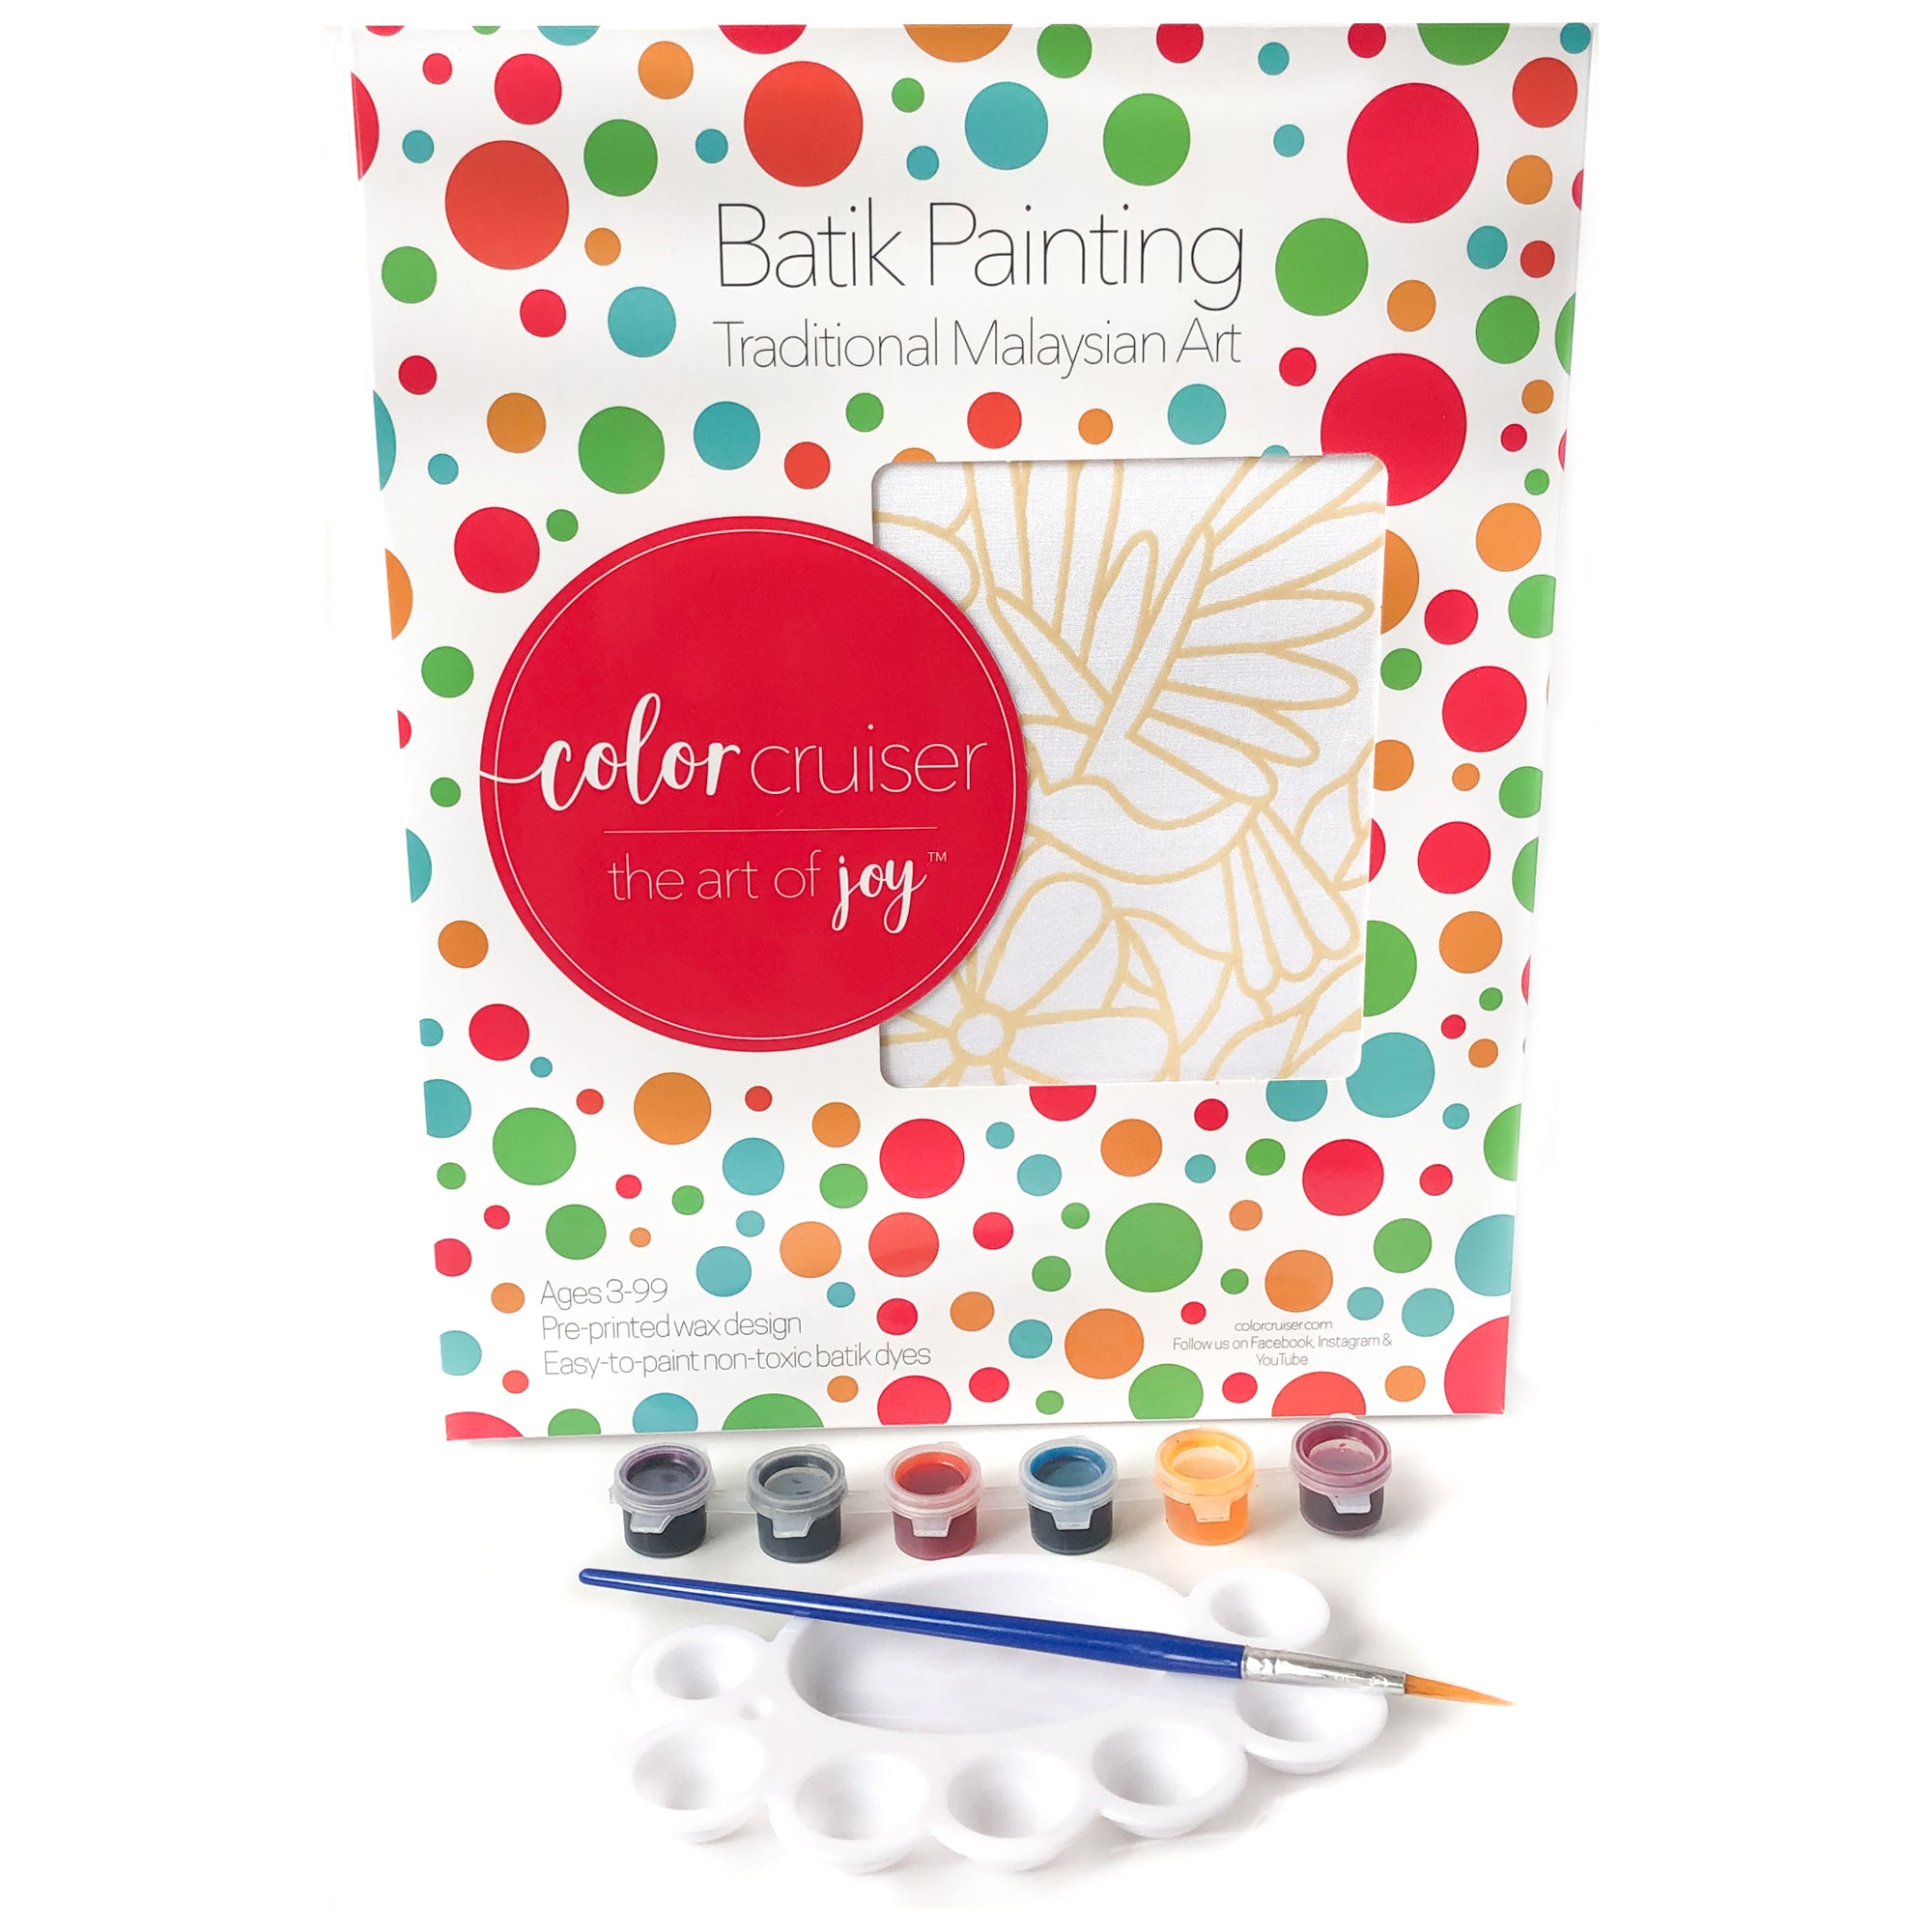 Fabric Painting Kit for Adults and Children - Creative Gift Under $20